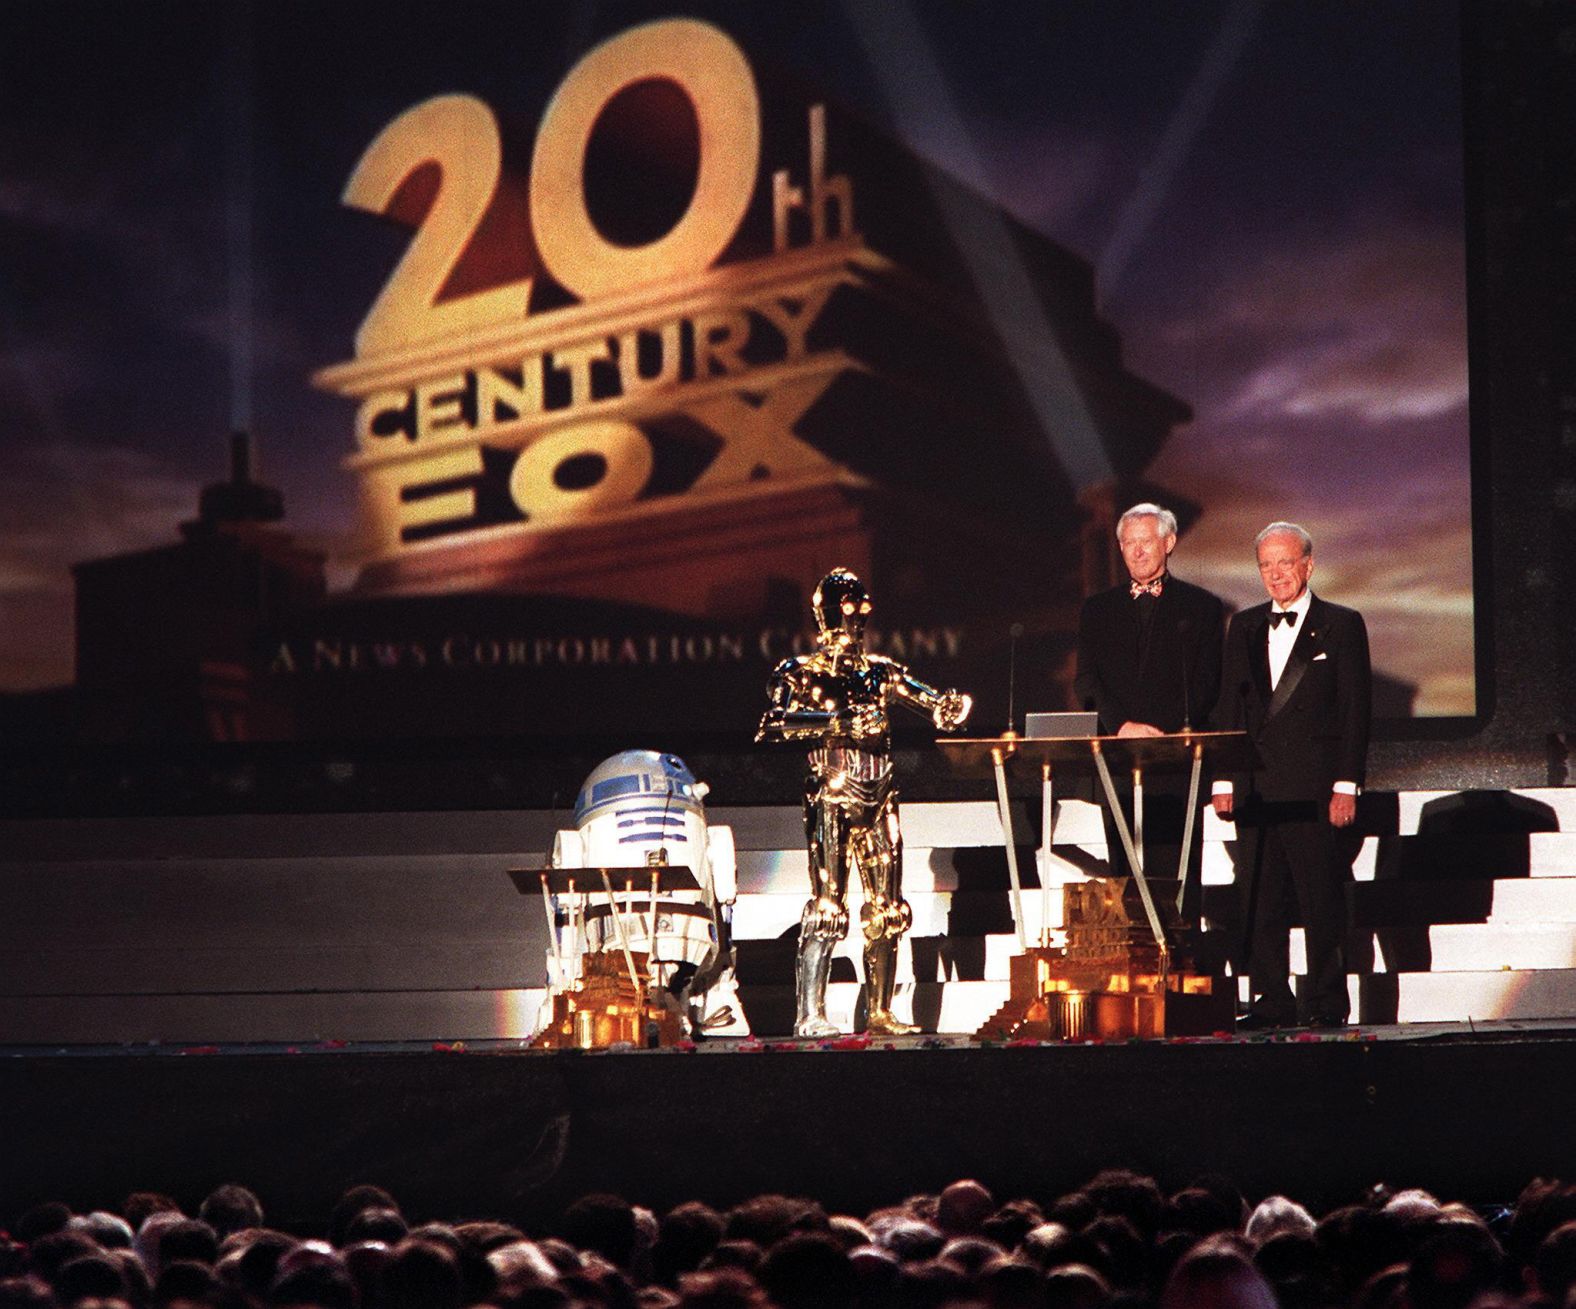 Murdoch, right, and Stuart Horney are joined by "Star Wars" characters R2D2 and C3PO as they officially open Fox Studios Australia in 1999.